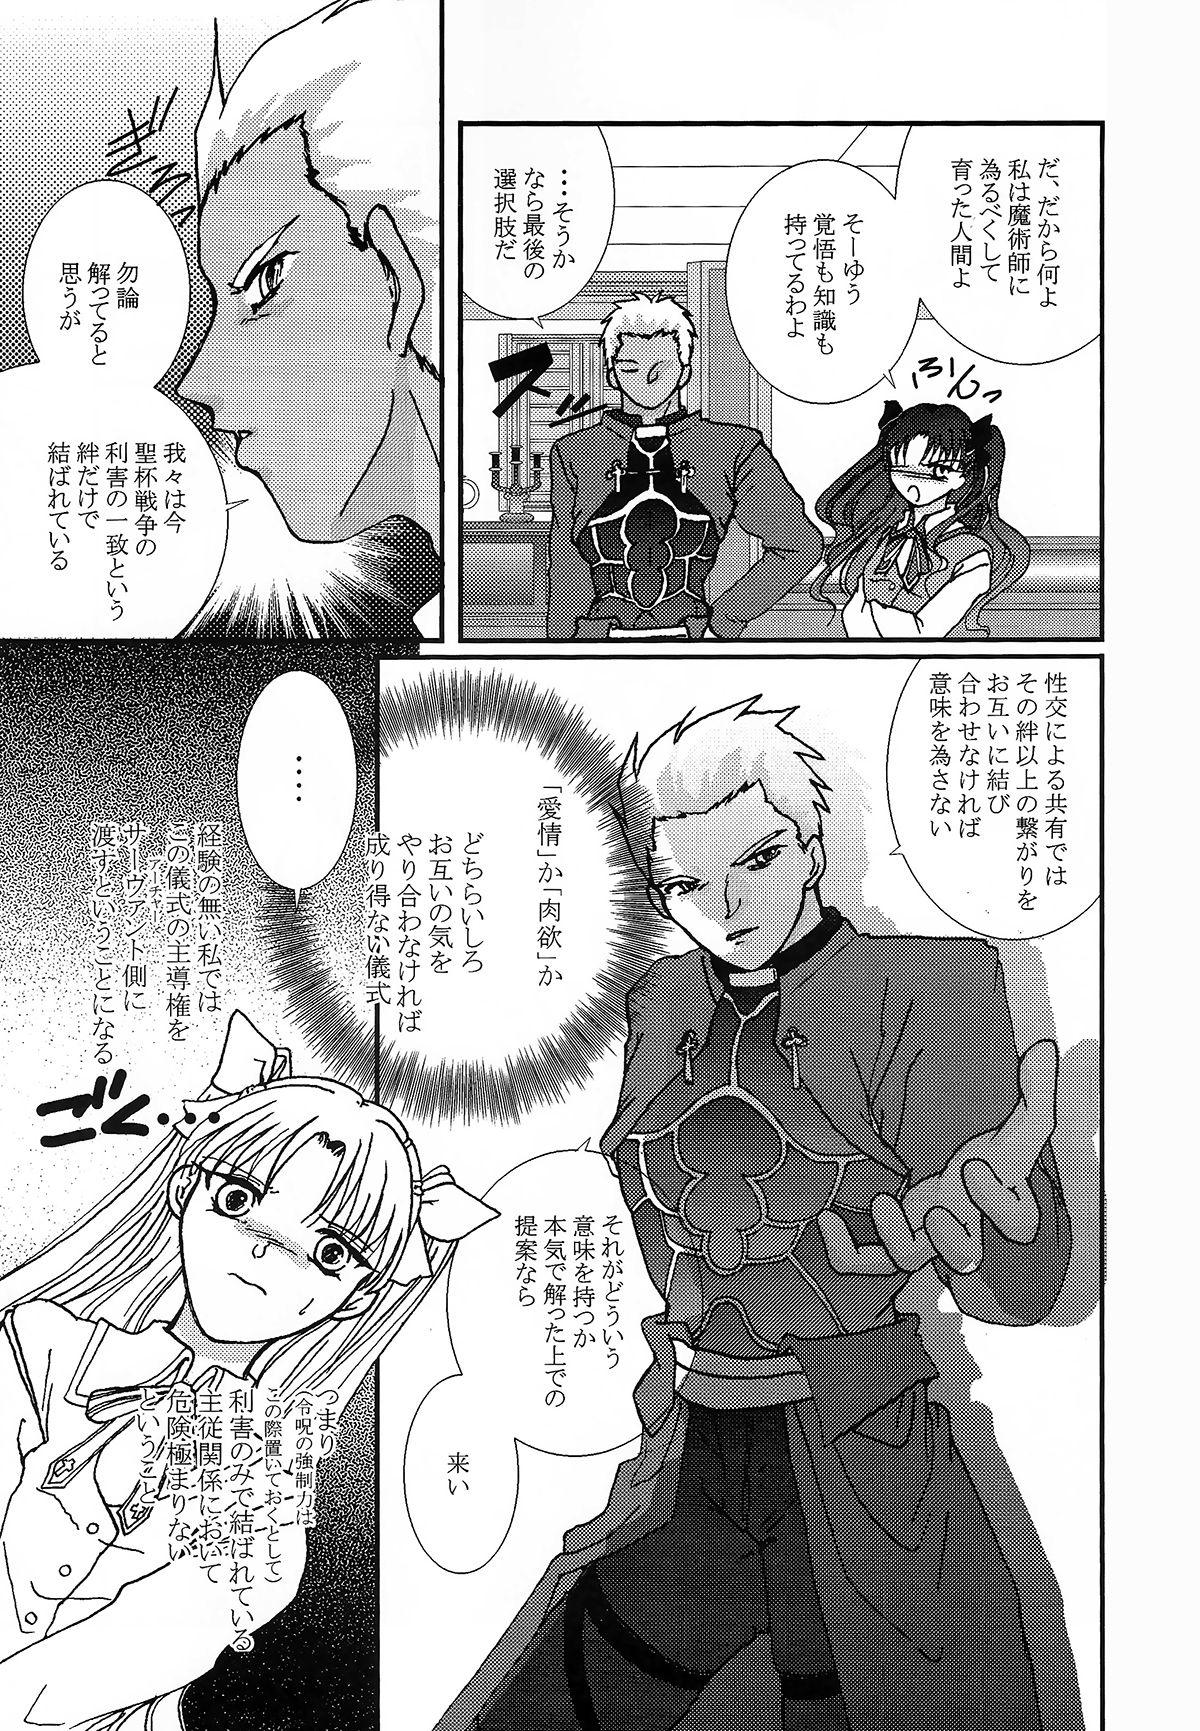 Hot Women Having Sex Question-7 - Fate stay night Satin - Page 9